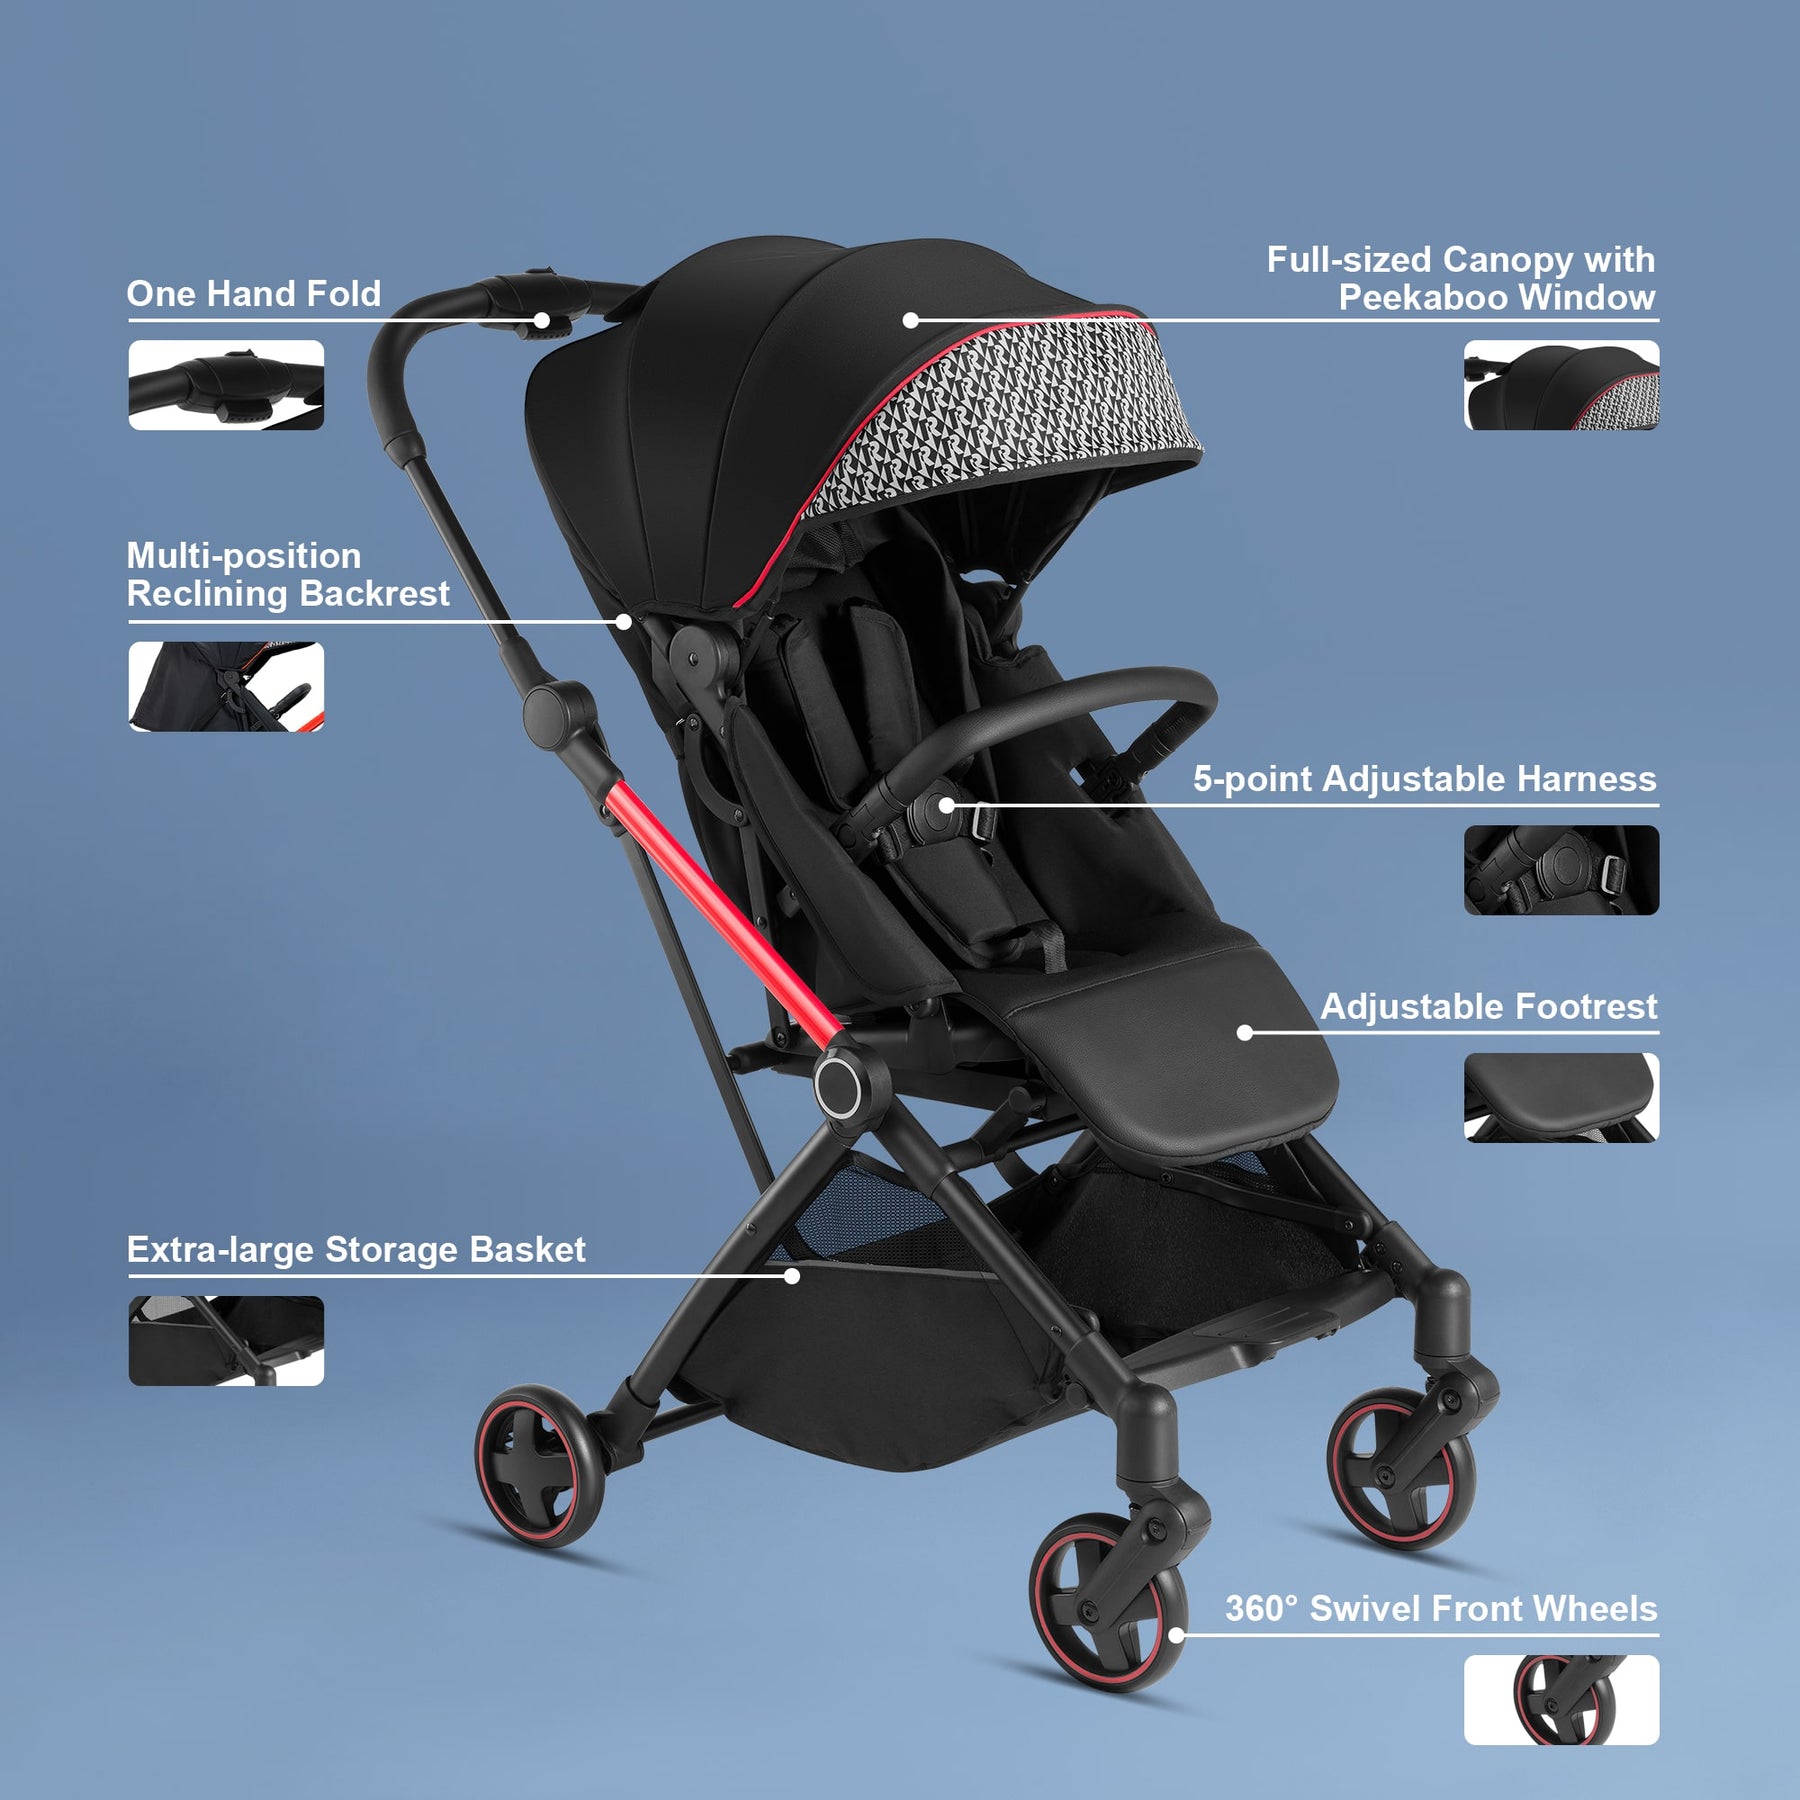 Royalbaby Lightweight Infant Stroller 360 Reversible Seat Compact Fold Portable Travel Toddler Baby Stroller with Umbrella & Multi-position Reclining